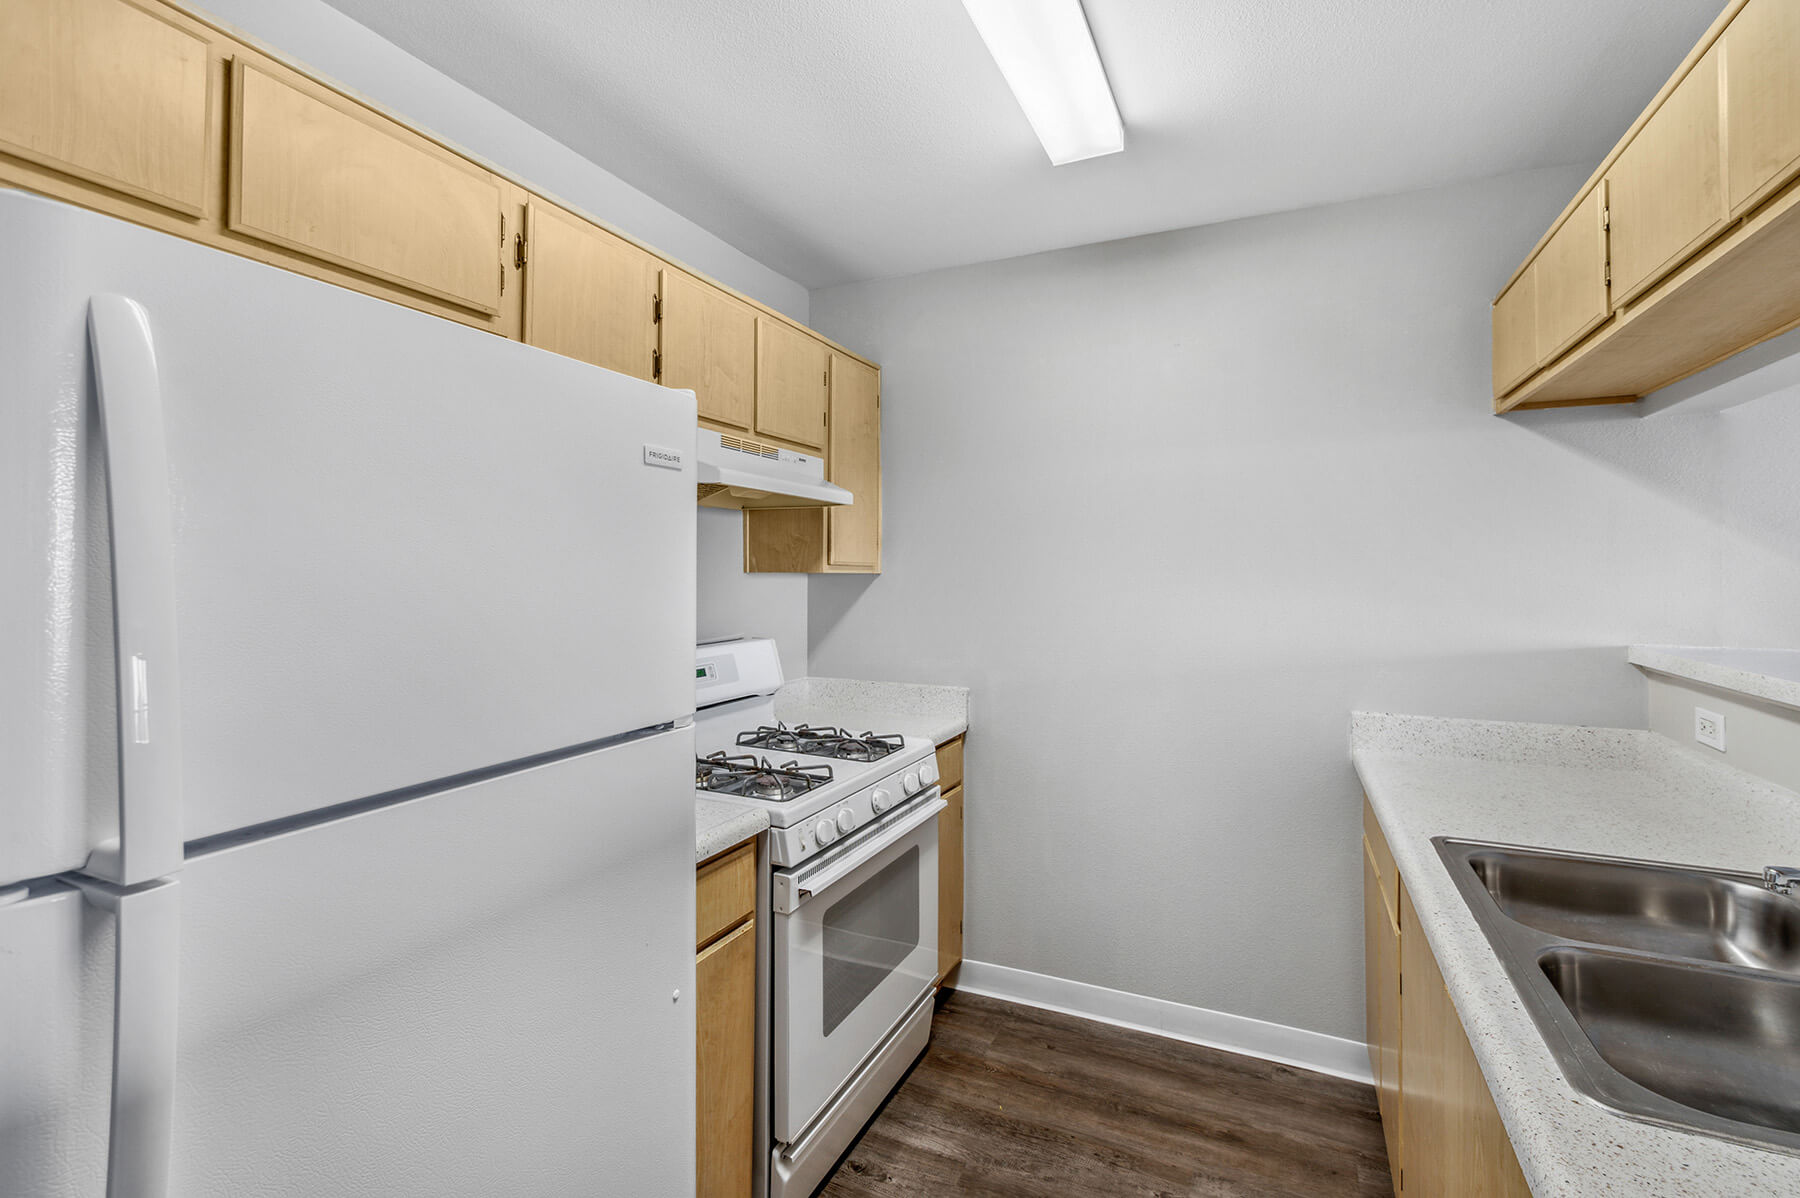 A white kitchen with wooden cabinets at the Harvard Yard and Glenmary Senior Affordable Apartments in Los Angeles, California.